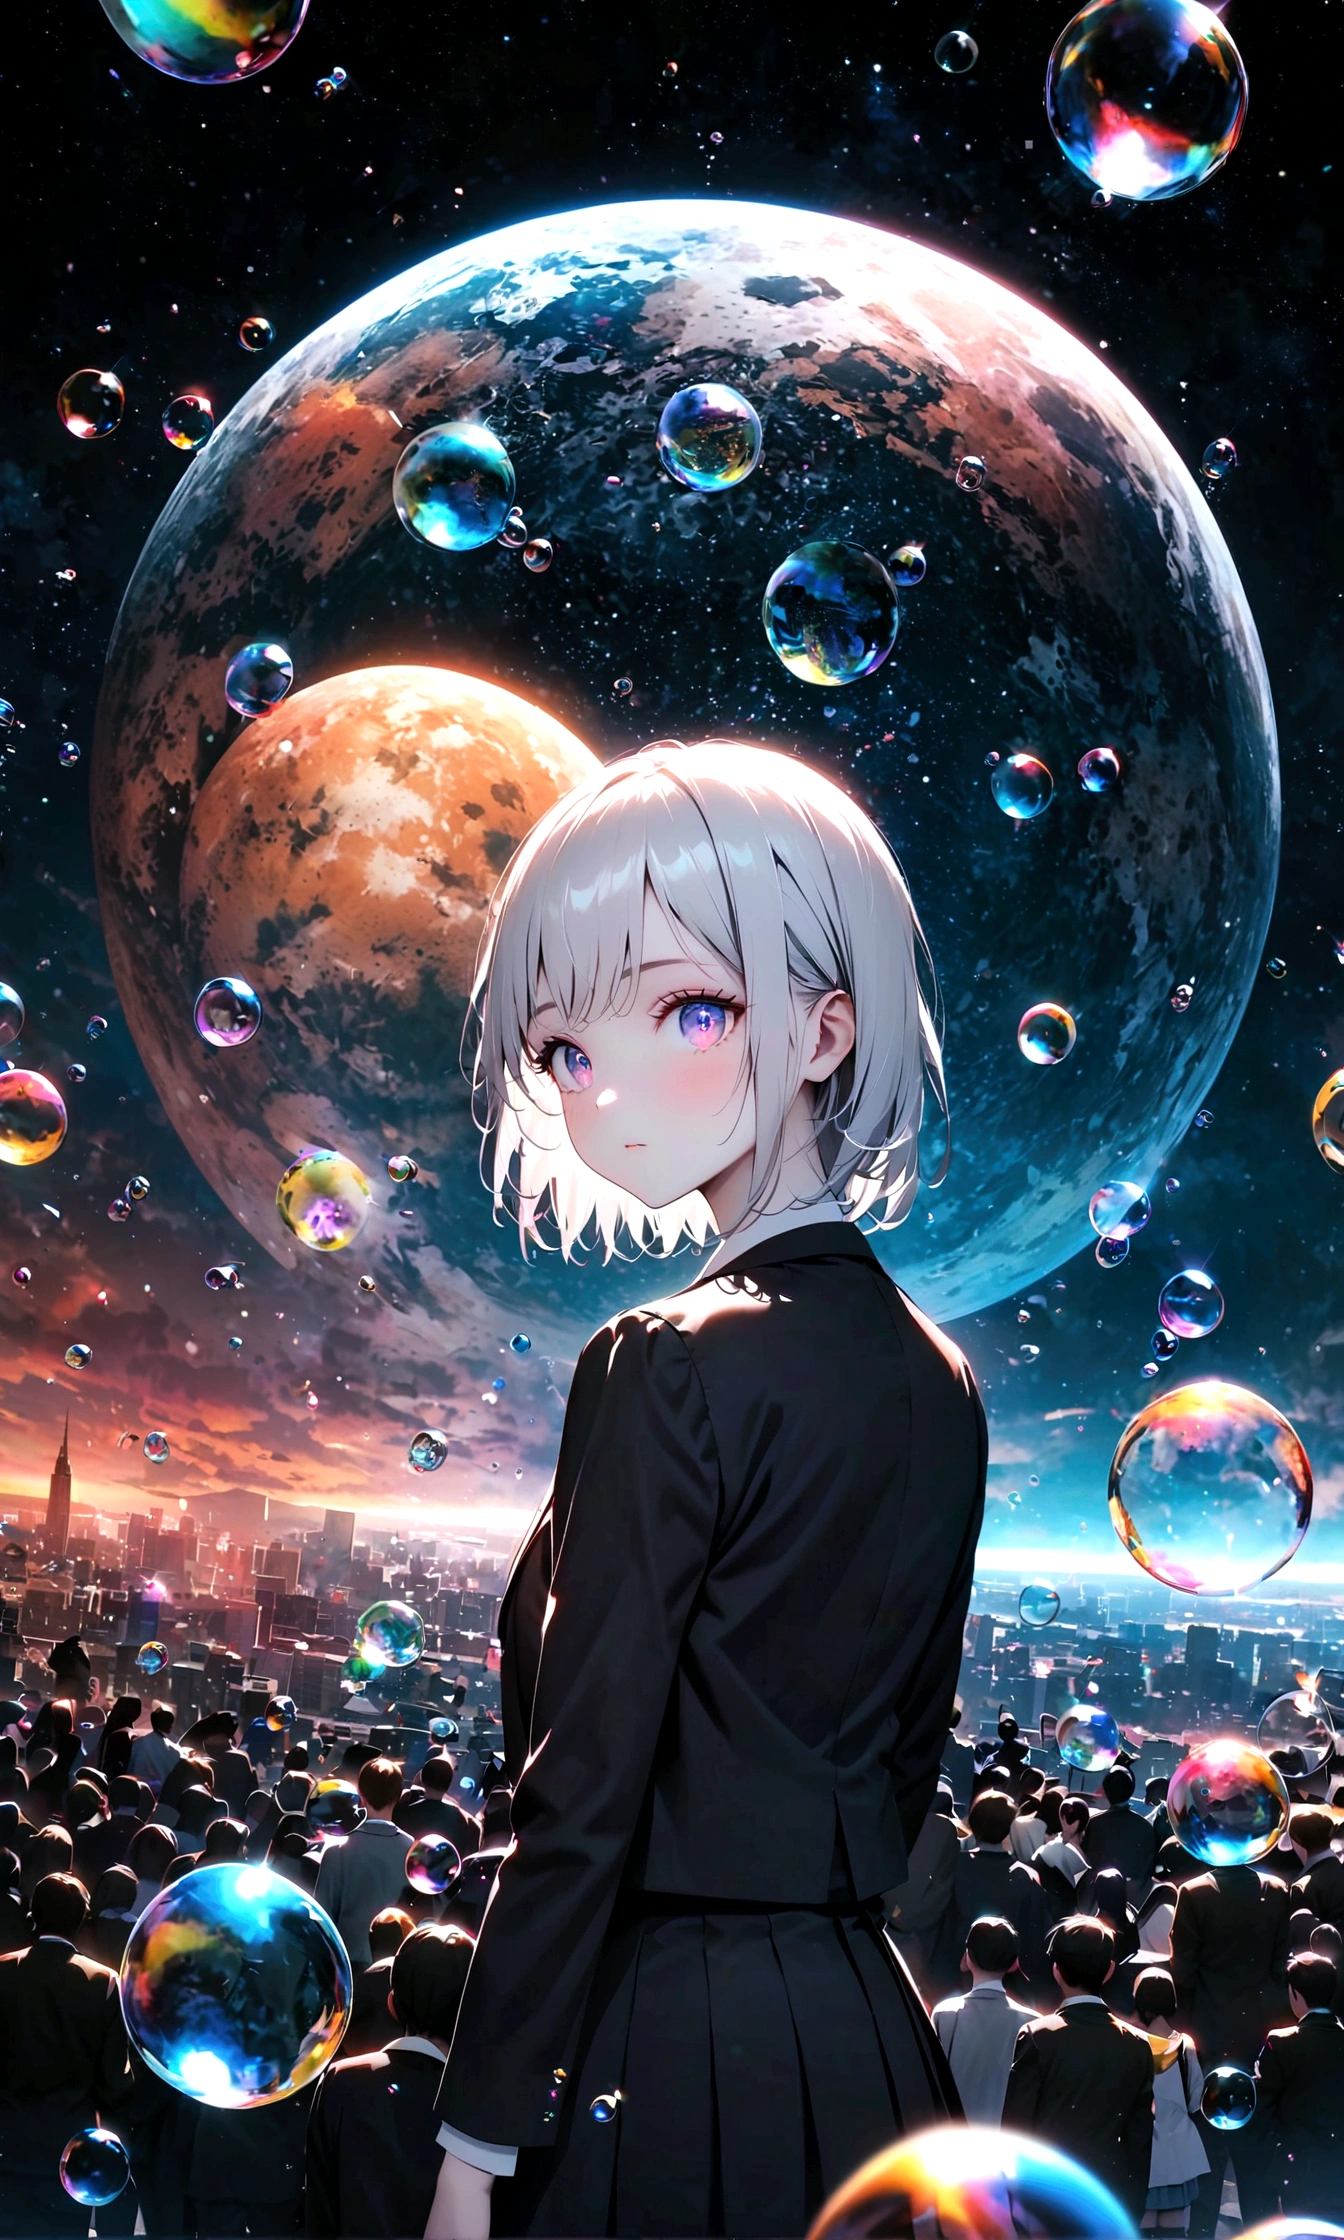 (woman\(student, 20-year-old, ＪＫ, Her short silver hair sways, Space-colored eyes, school black uniform, Pale skin) Look up at the sky), (A large glass-colored whale swims in the air), Beautiful sky, Beautiful Clouds, Colorful summer flowers are blooming everywhere., (Transparent bubbles shine like prisms here and there in the sky), There is a noon moon and a noon star in the sky, In a crowded downtown, BREAK ,quality\(8K,Highly detailed CG unit wallpaper, masterpiece,High resolution,top-quality,top-quality real texture skin,surreal,Increase the resolution,RAW Photos,highest quality,Very detailed,wallpaper,Cinema Lighting,Ray Tracing,Golden Ratio\),(Long Shot),Wide Shot,